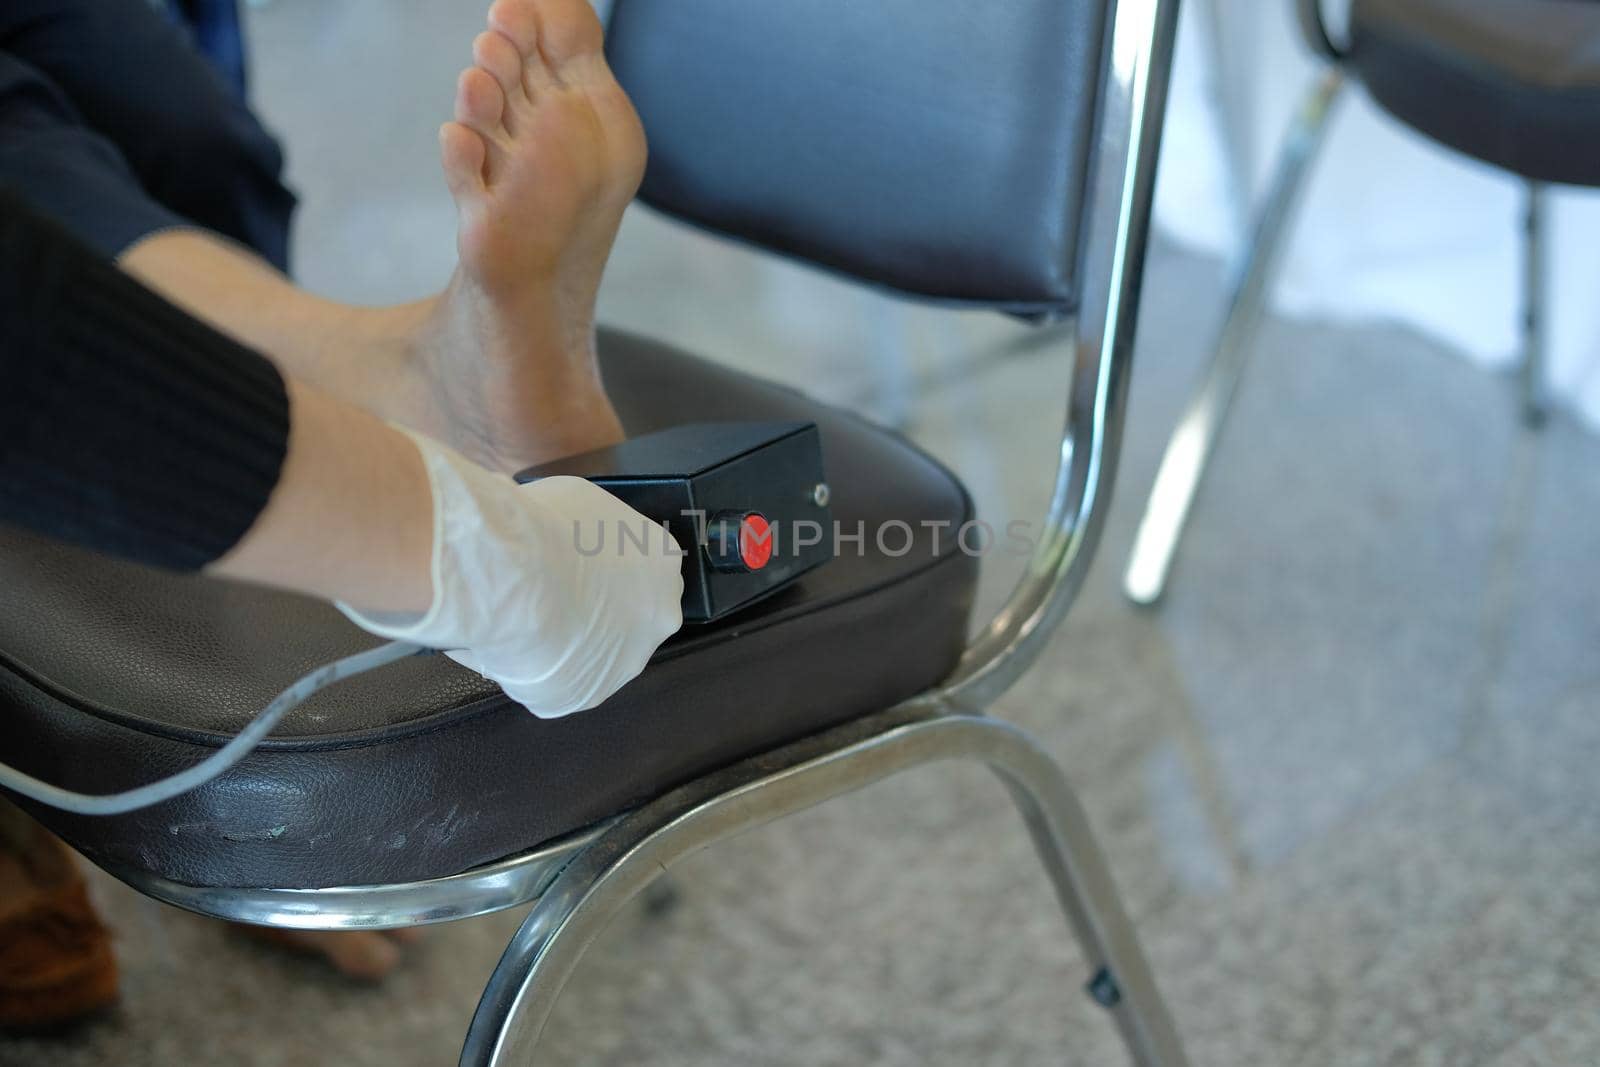 nurse measuring appreciation vibration threshold on woman foot with biothesiometer instument to check neurological disease